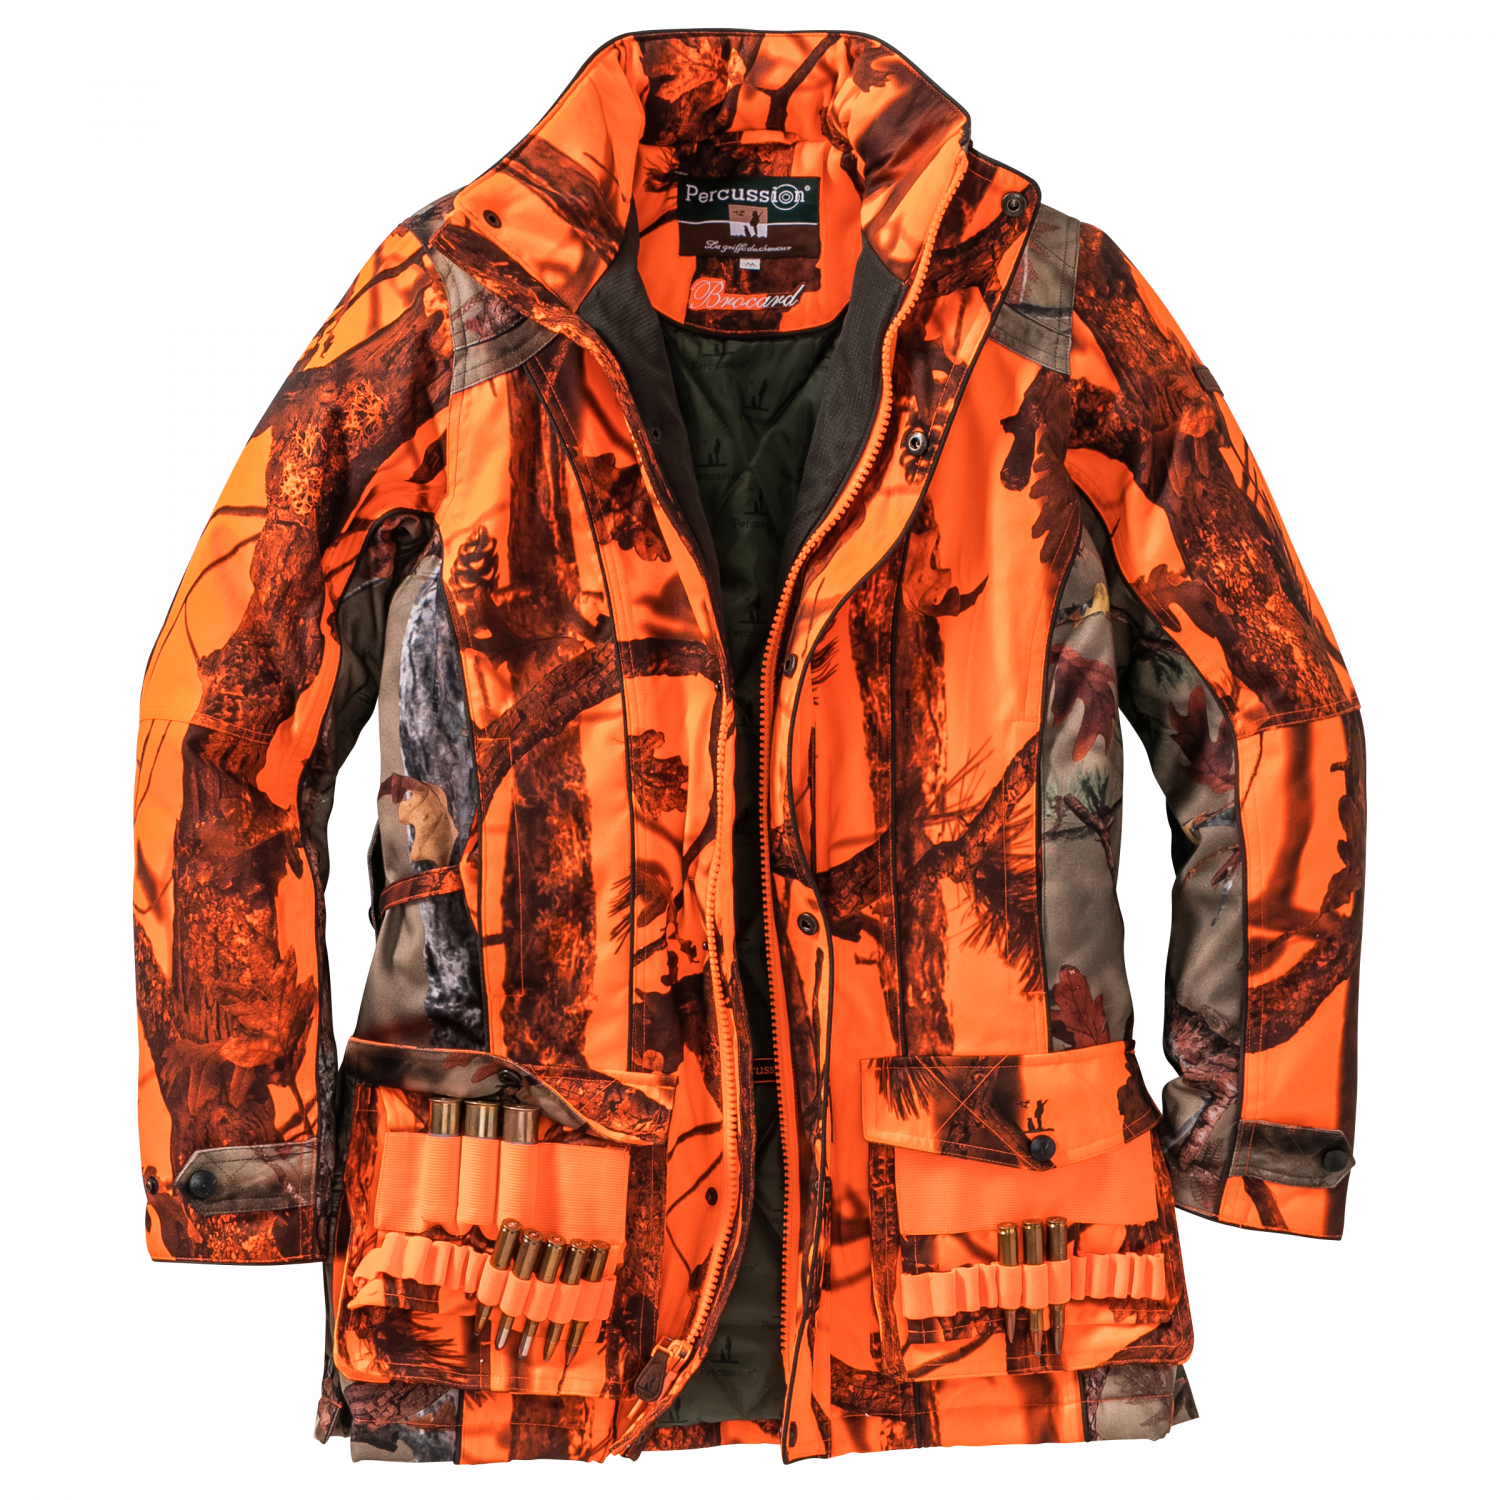 Percussion Women's Outdoor Jacket Brocard 